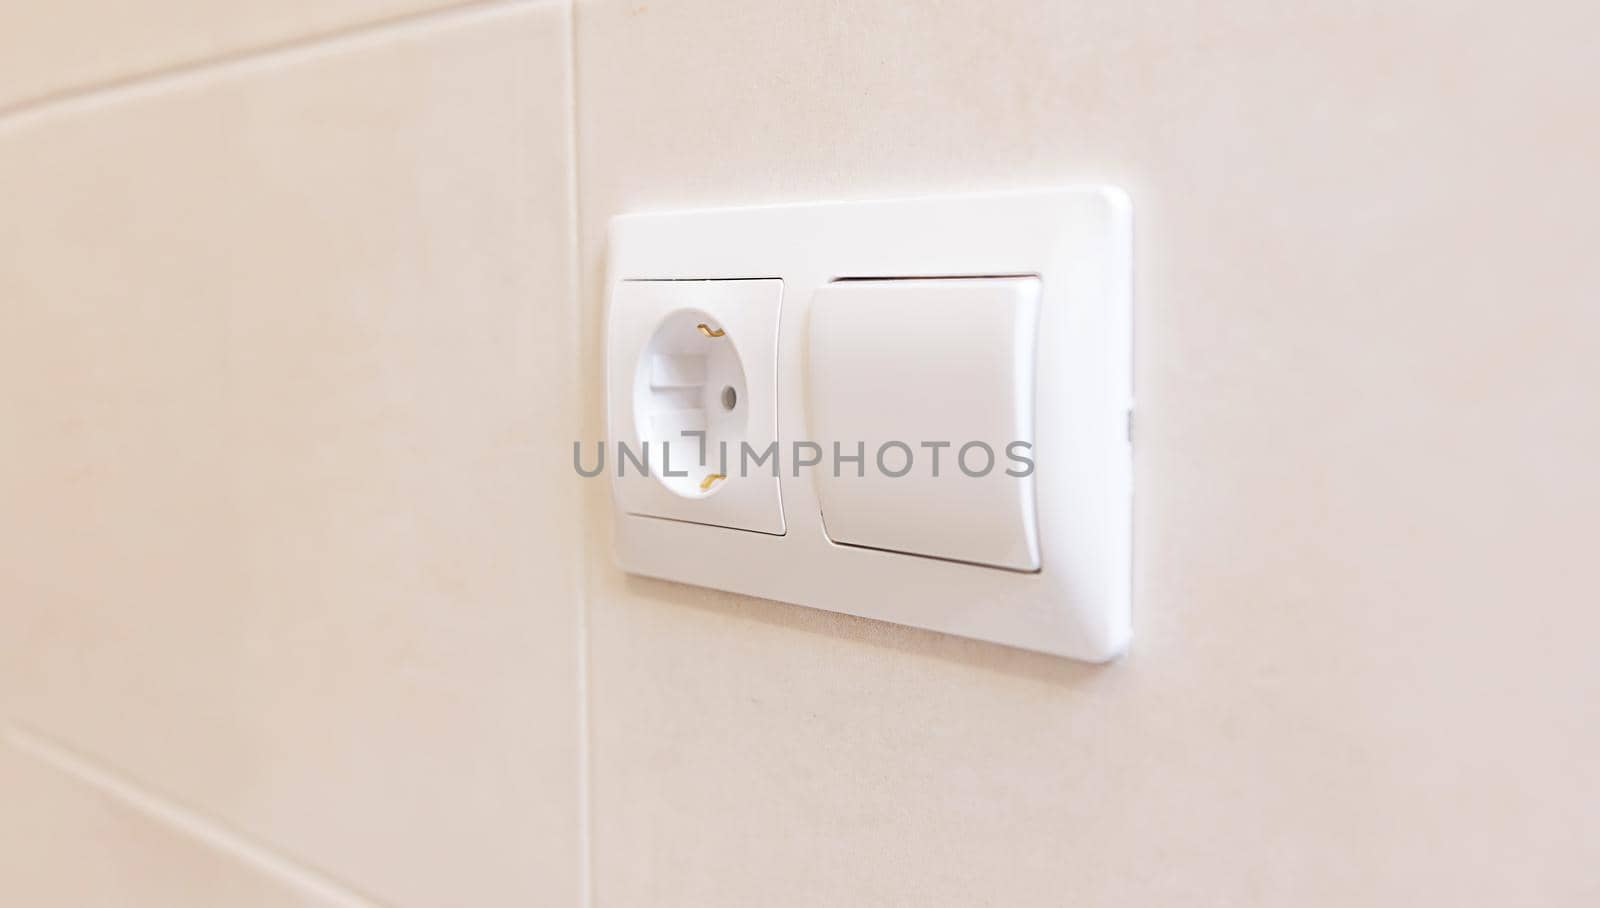 close-up of an electric socket and a light switch on a white ceramic tile wall. White copy paste space for your design. Modern European interior